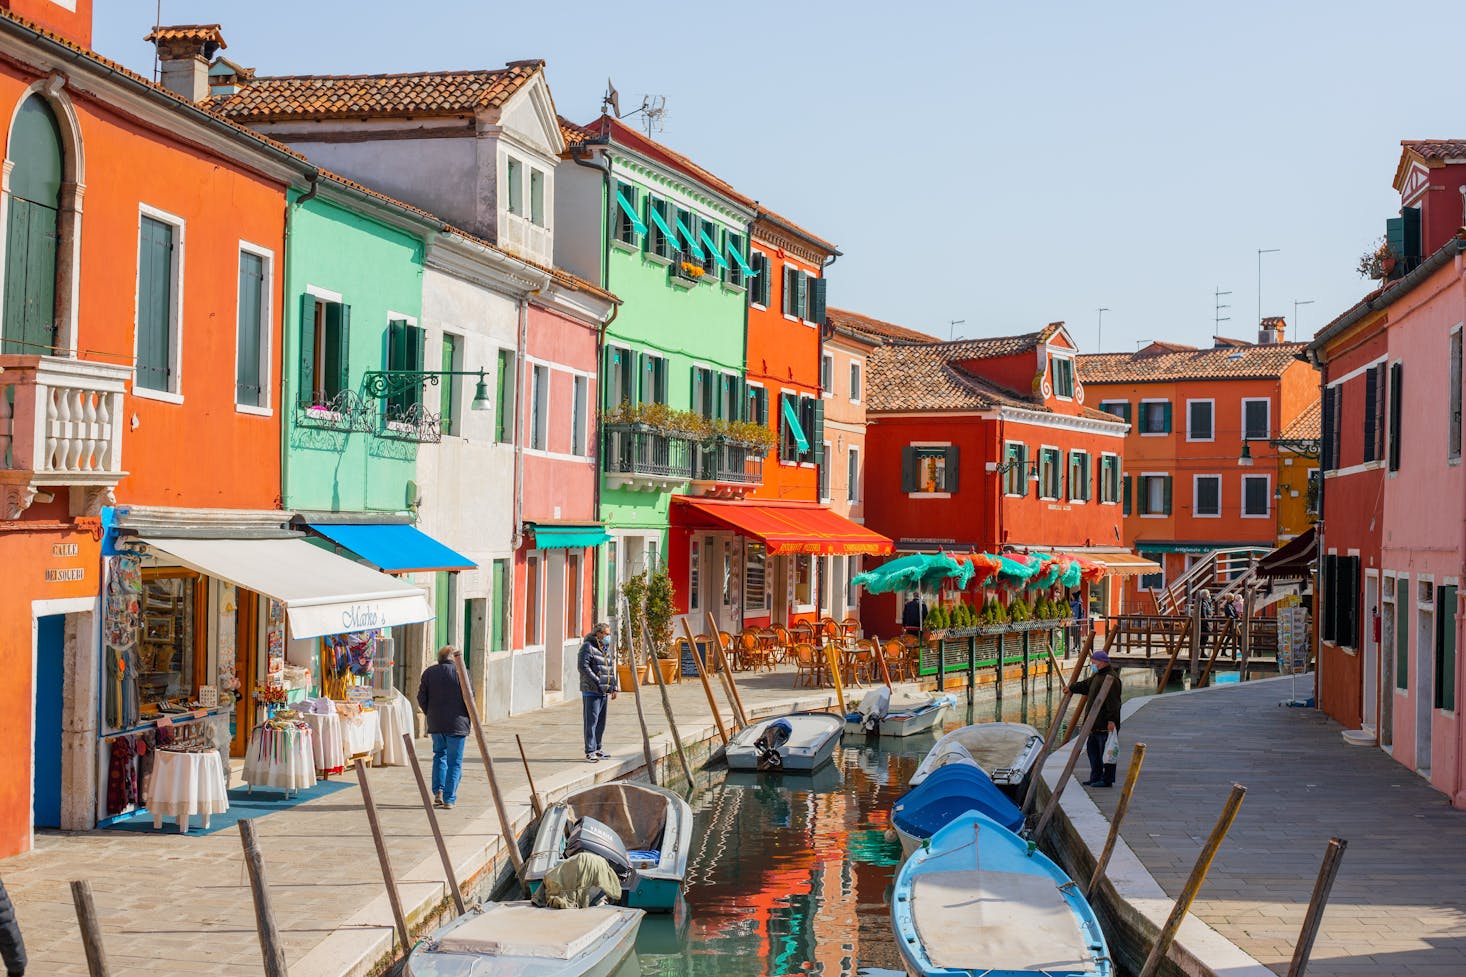 Best day trips from Venice